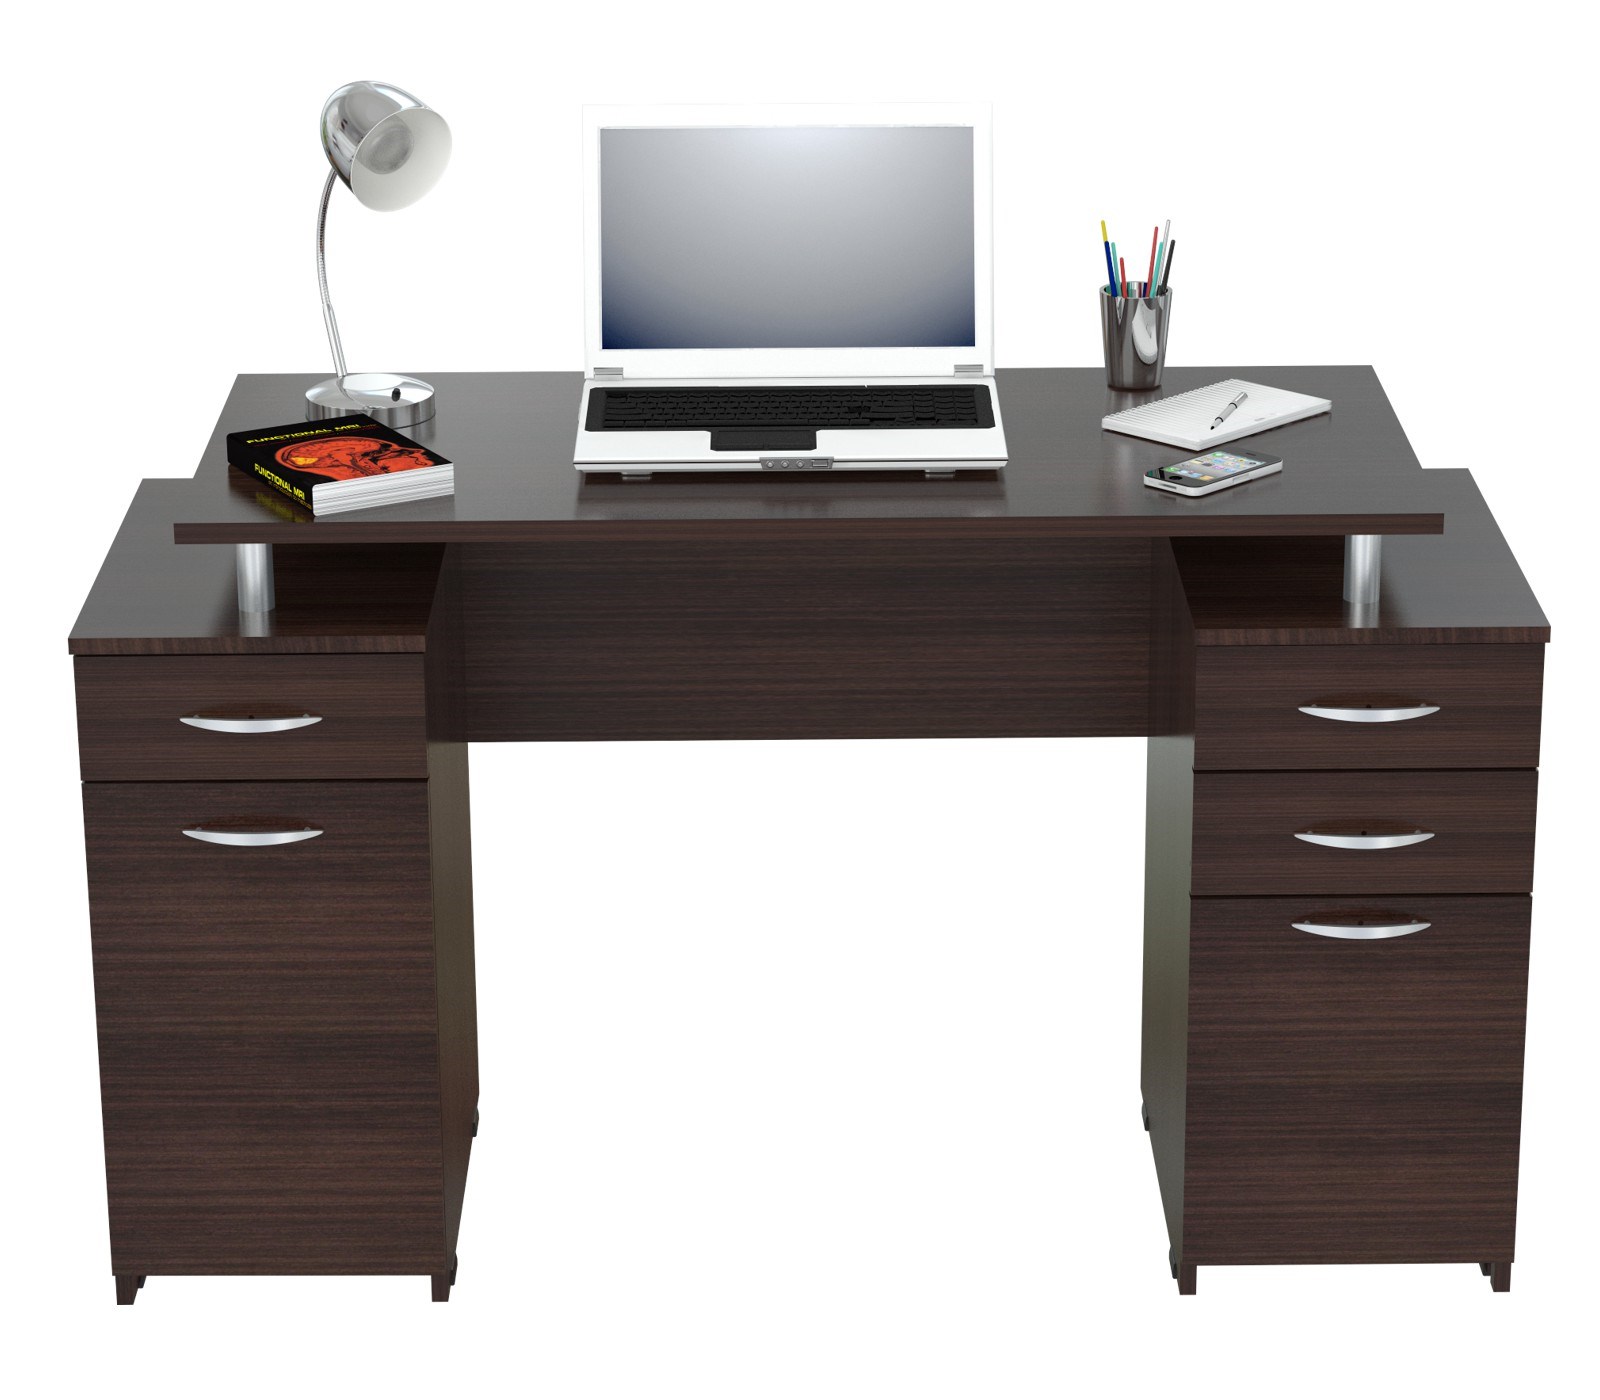 30" Espresso Melamine and Engineered Wood Computer Desk with 4 Drawers